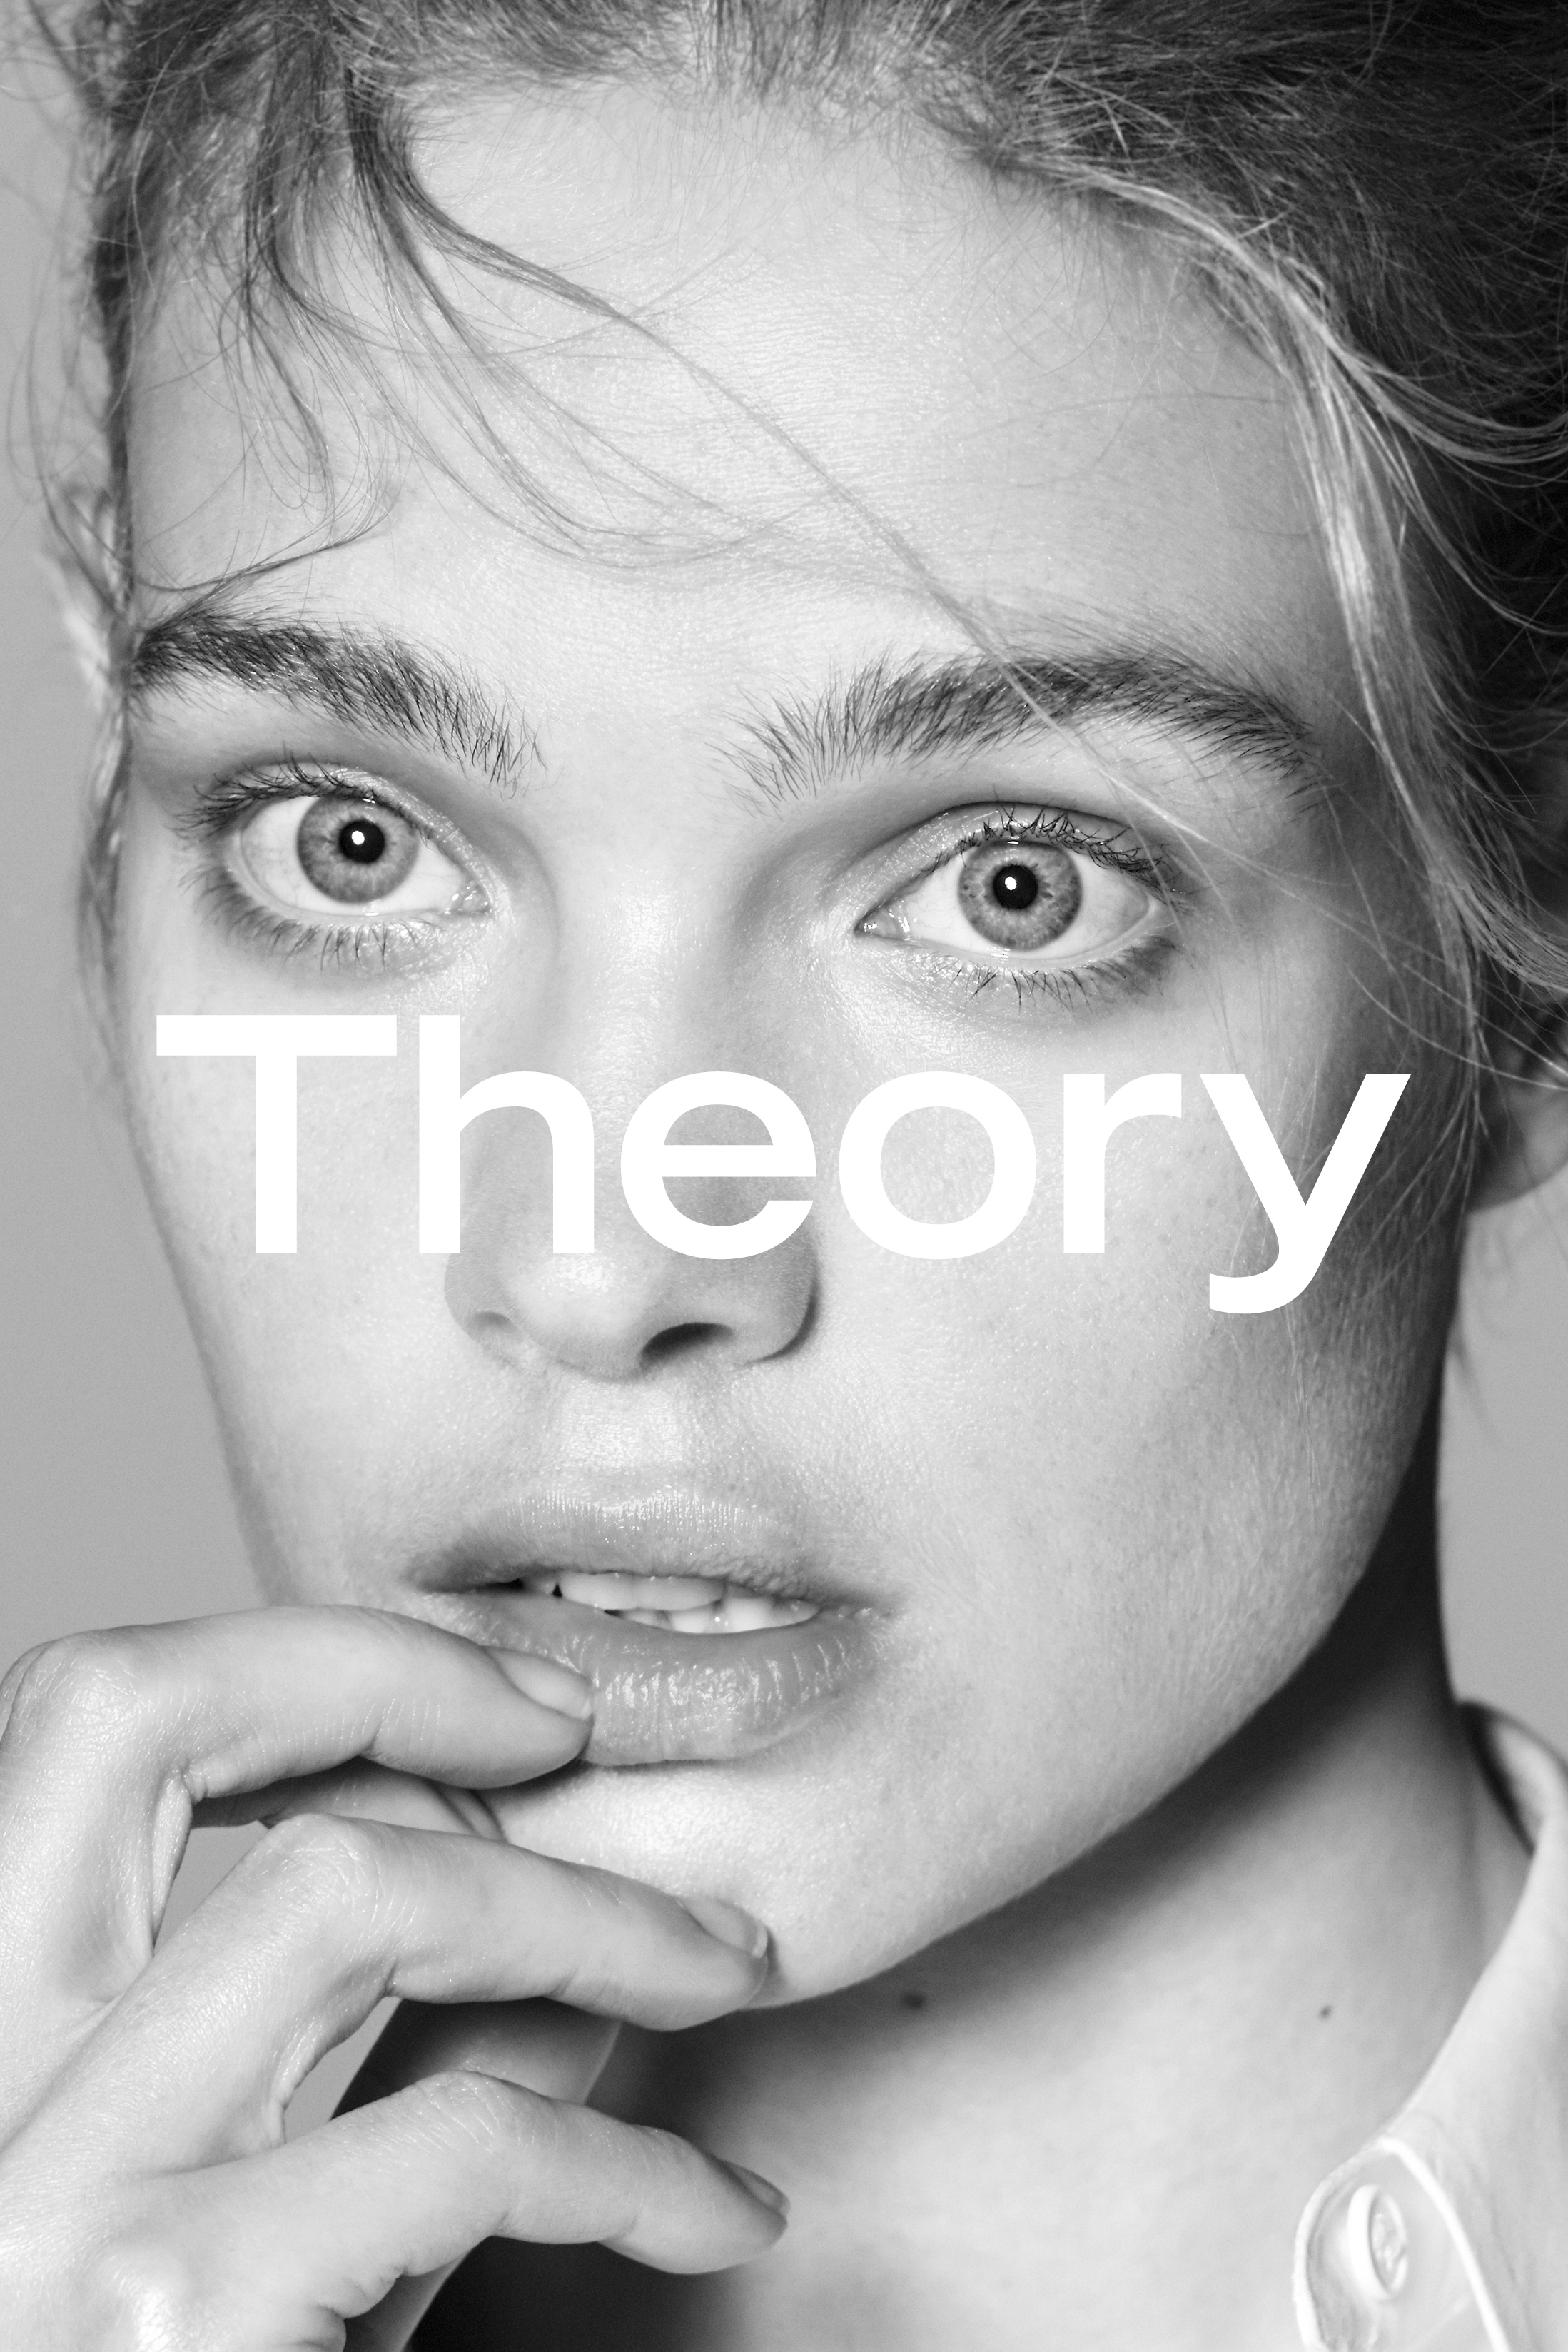 THEORY UNVEILS NEW LOGO WITH THEIR SPRING-SUMMER 2015 CAMPAIGN